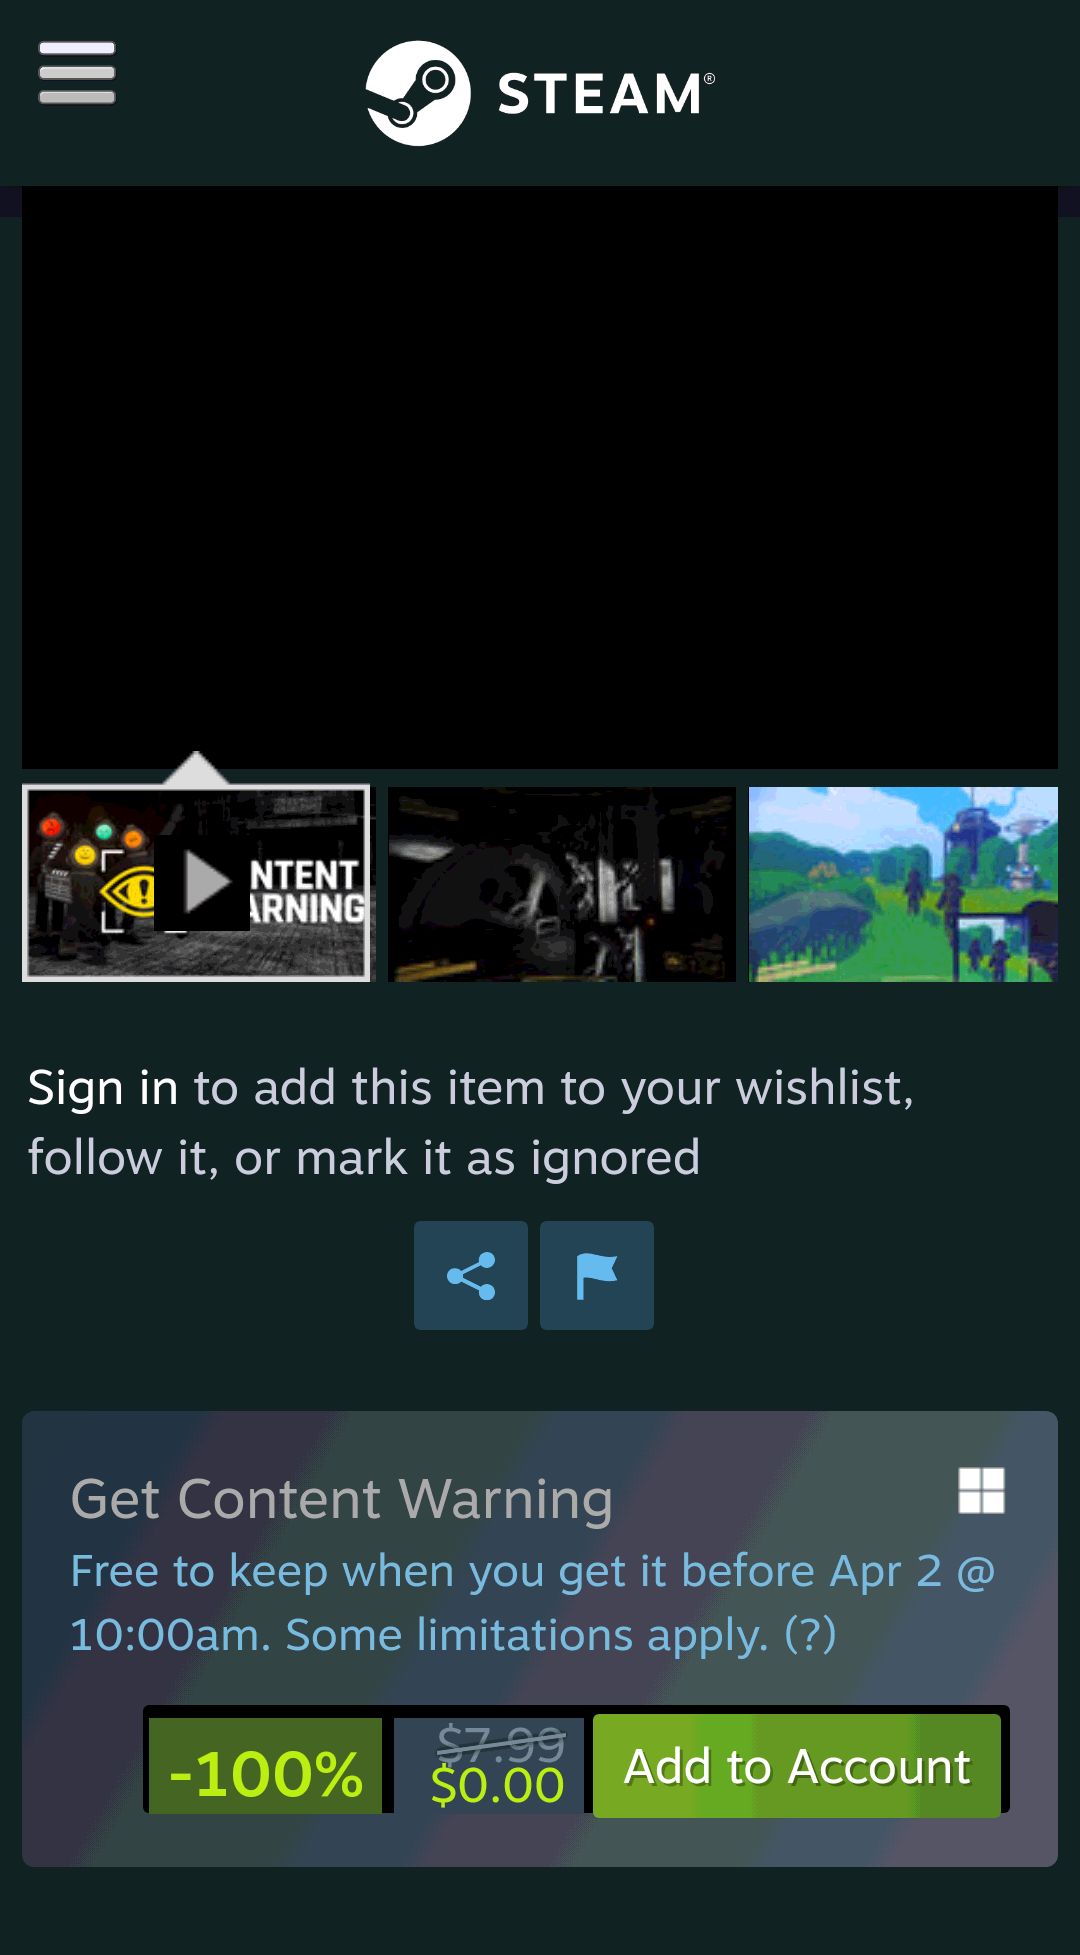 Save 100% on Content Warning on Steam喜加一